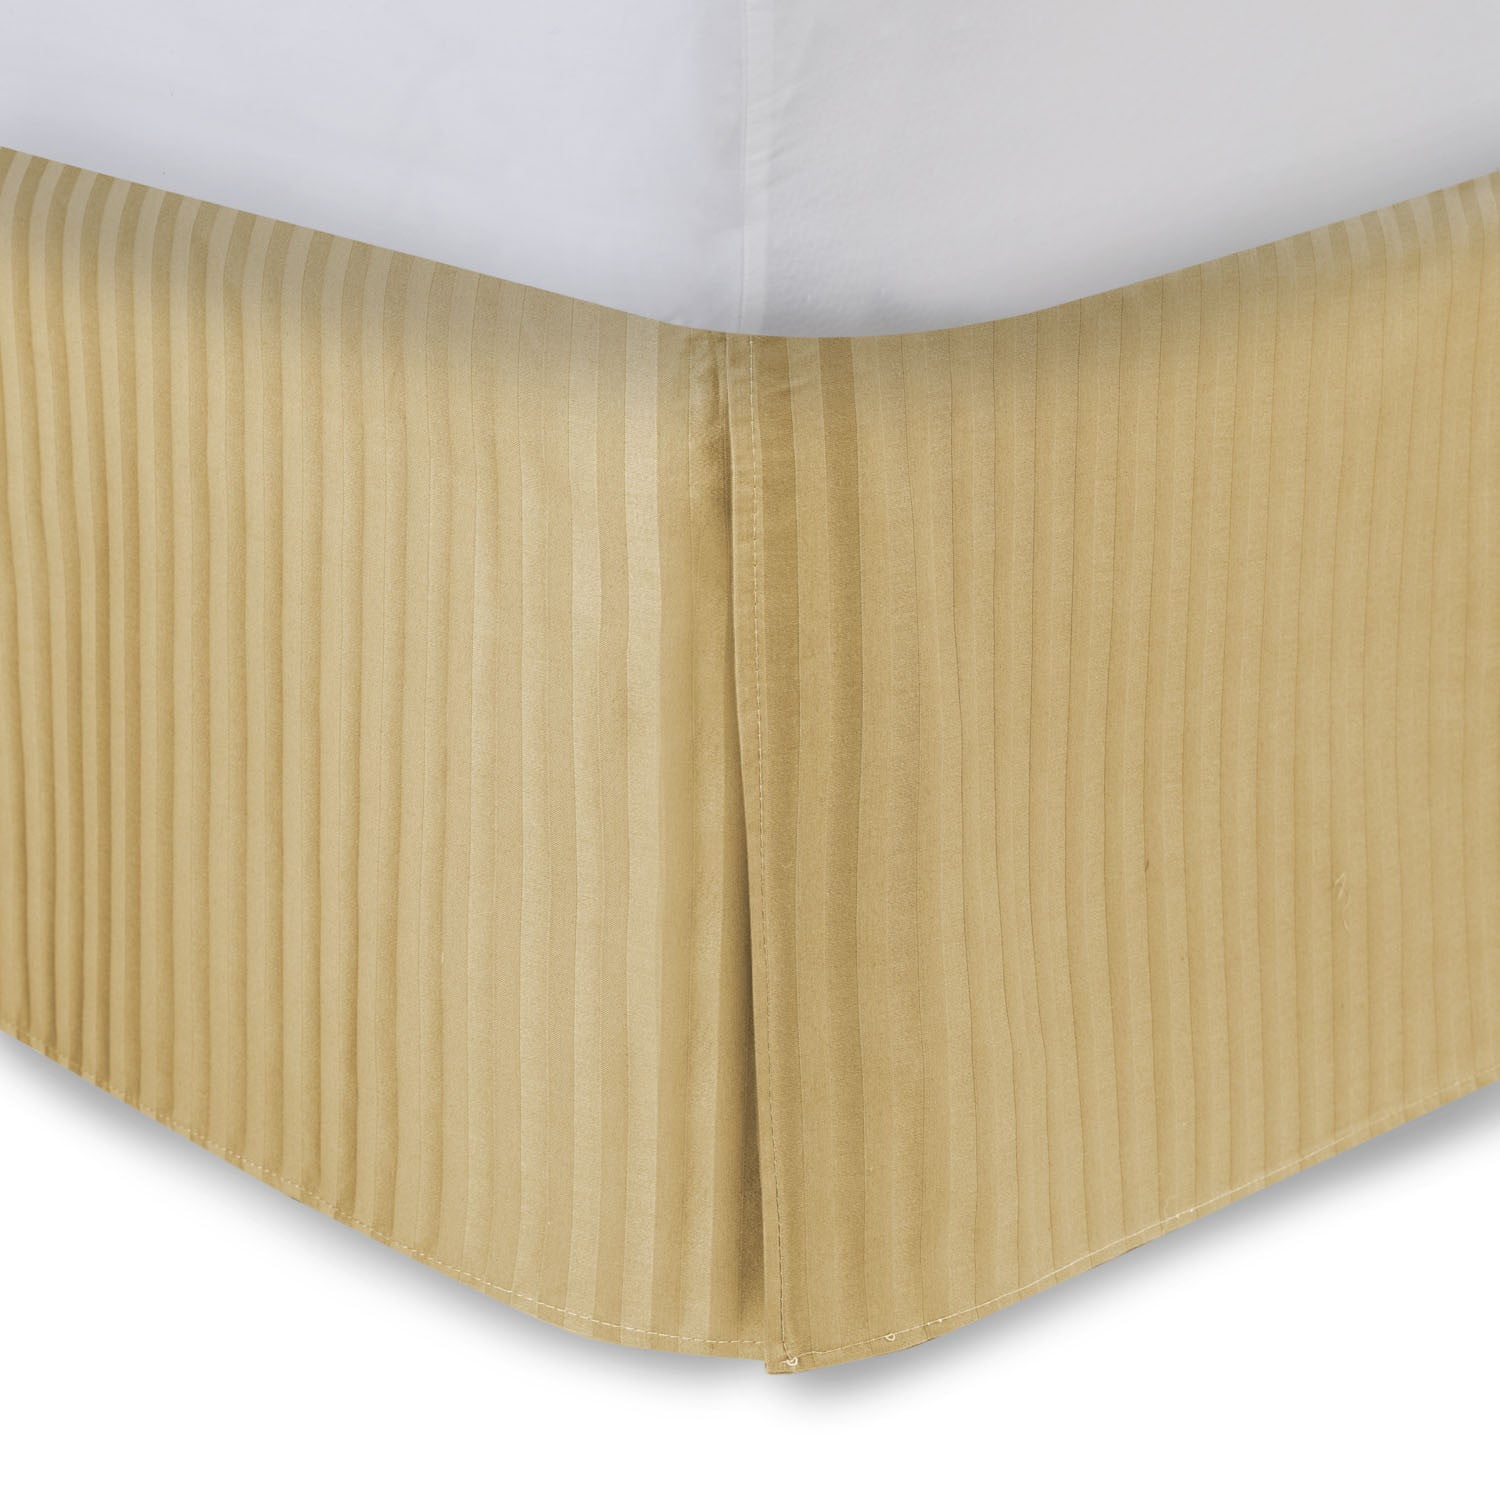 Details about   Top Quality Split Corner Ruffle Bed Skirt Taupe Color Poly Cotton Queen Sizes 